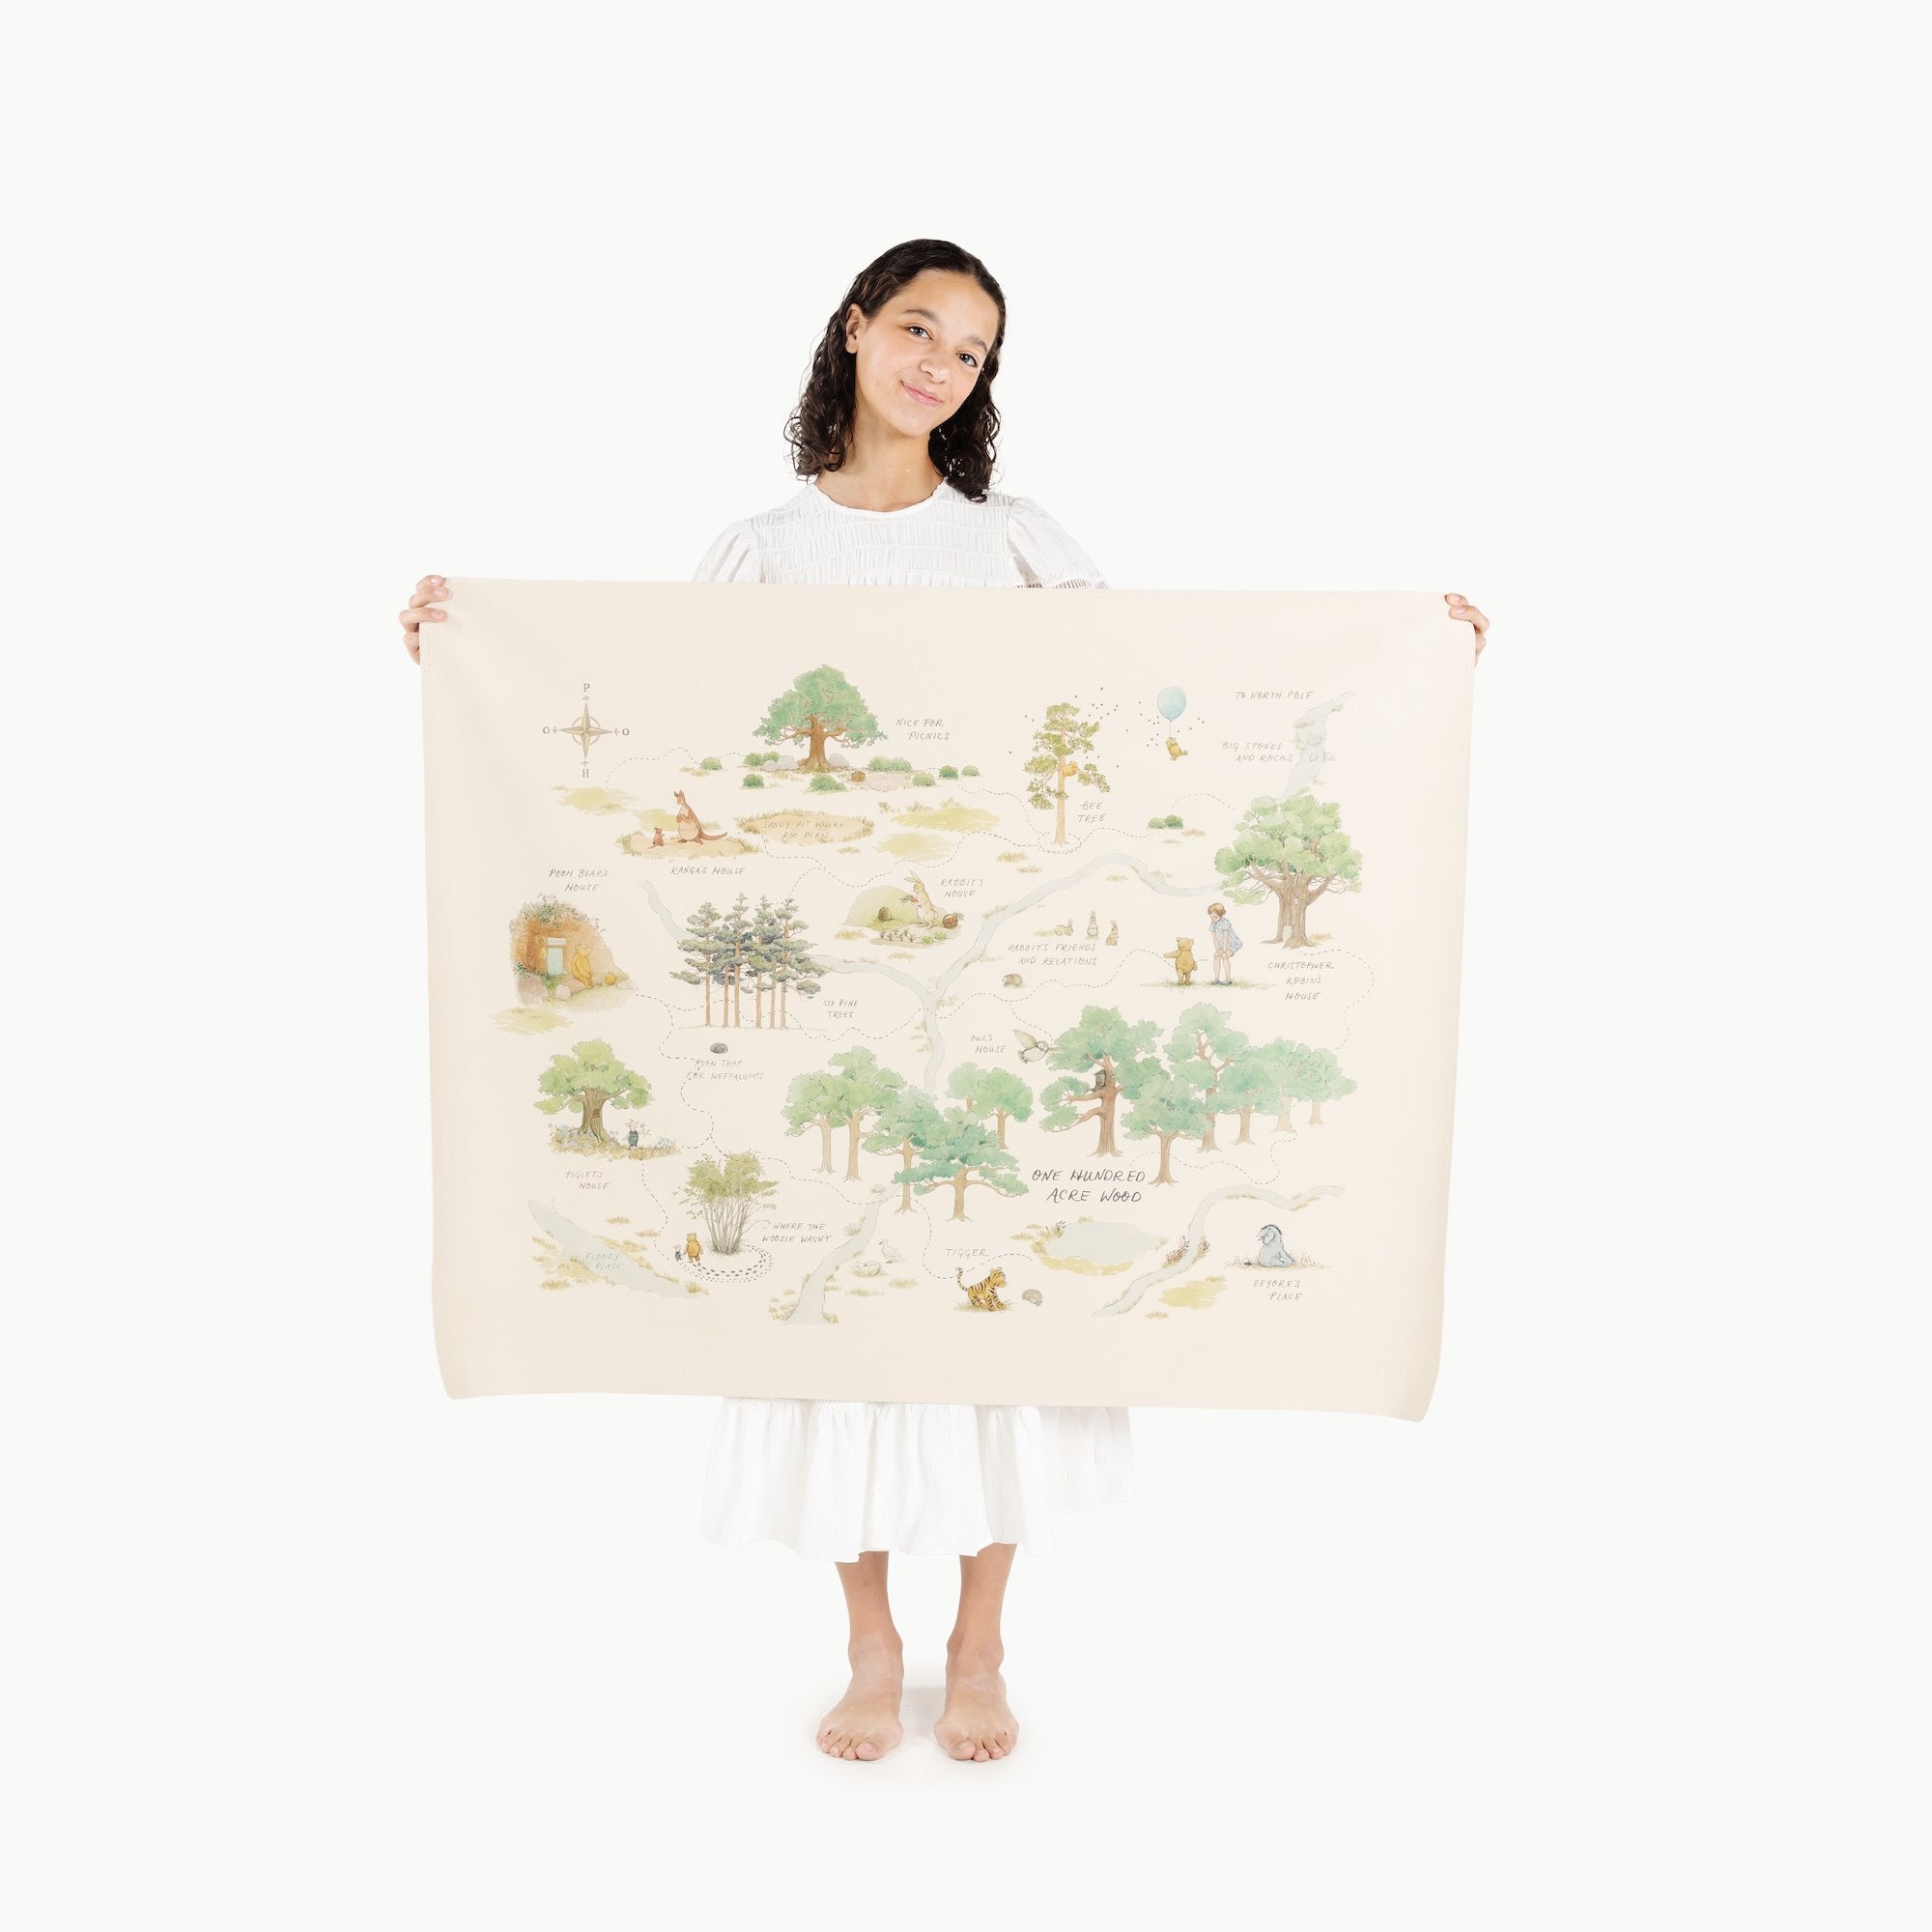 Hundred Acre Wood (on sale)@Woman holding the Hundred Acre Wood Mini+ Mat